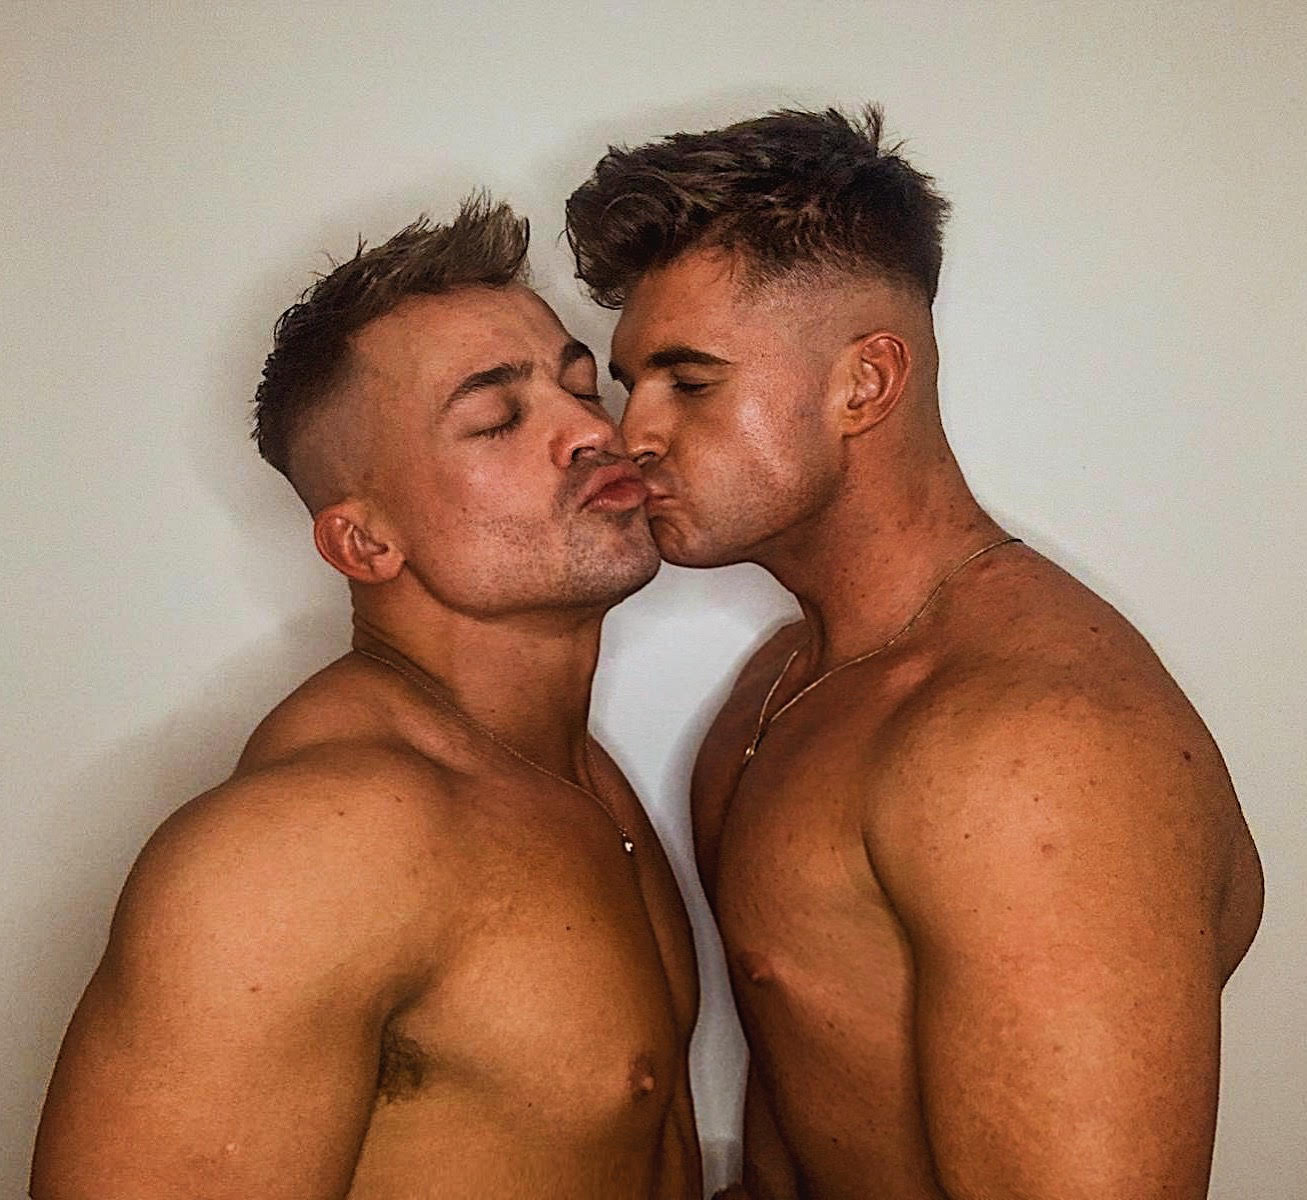 Onlyfans free gay